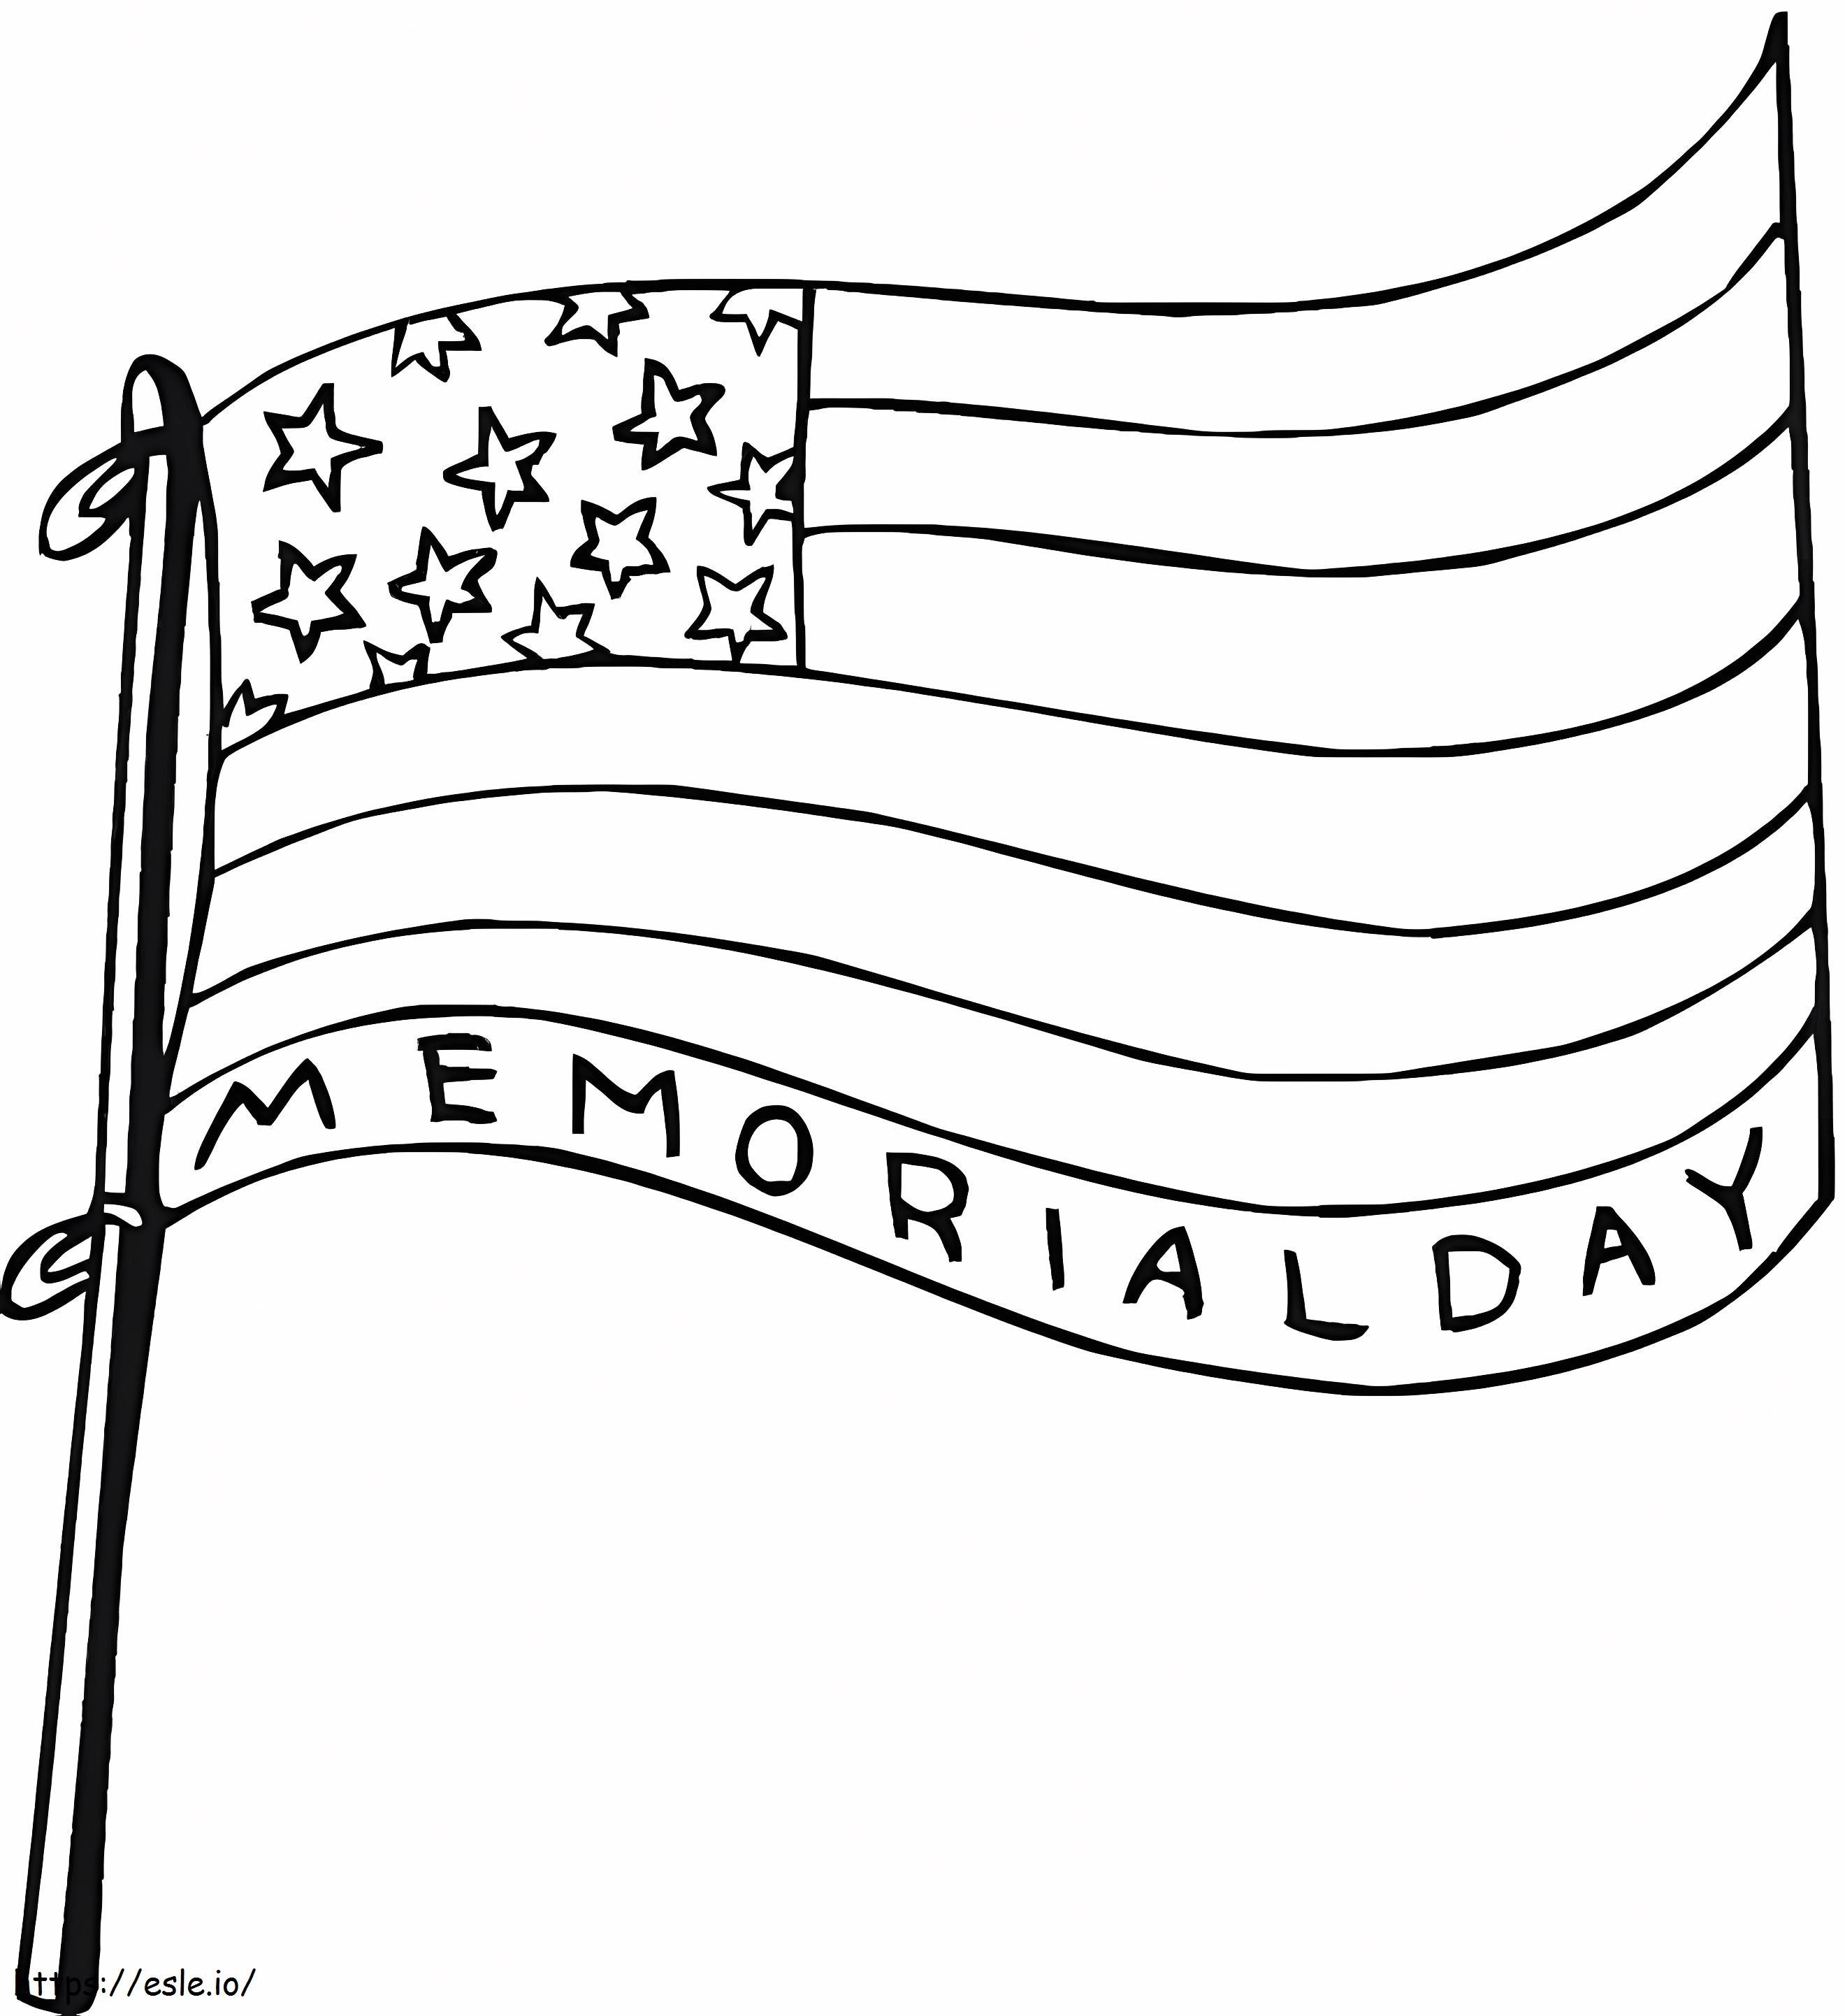 Memorial Day Flag coloring page